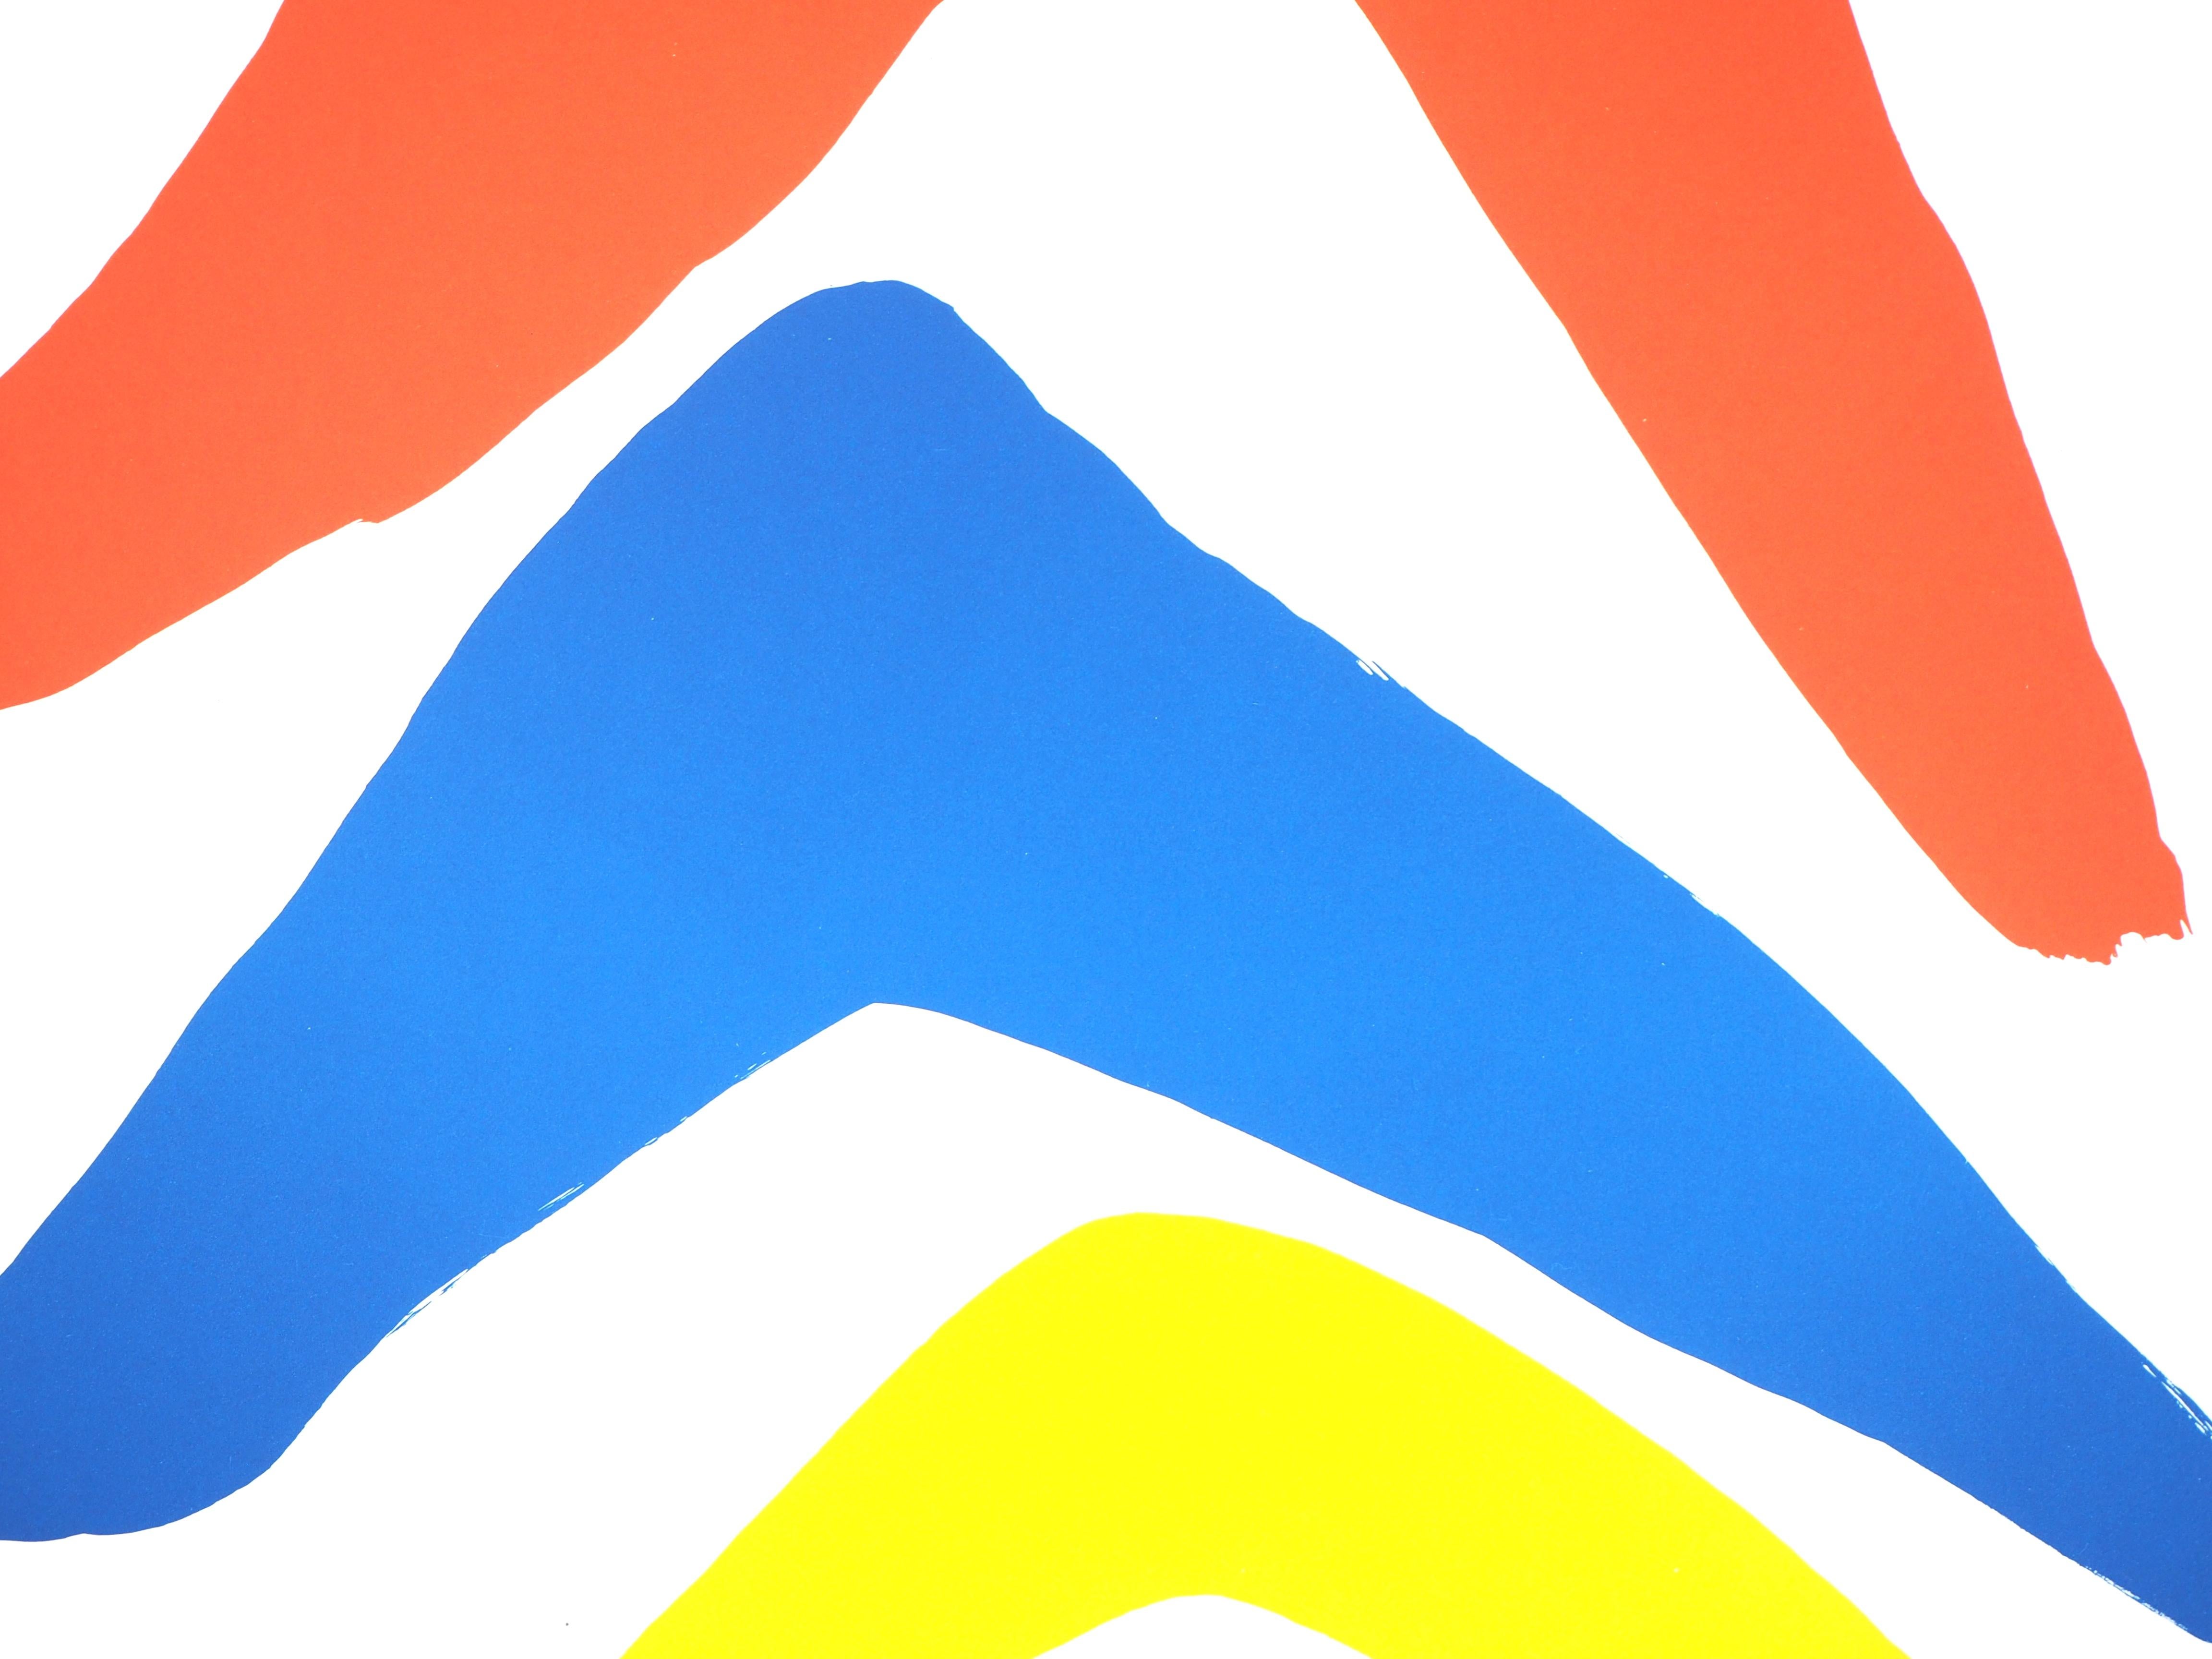 Stabiles - Lithograph poster (Maeght) - Orange Abstract Print by (after) Alexander Calder